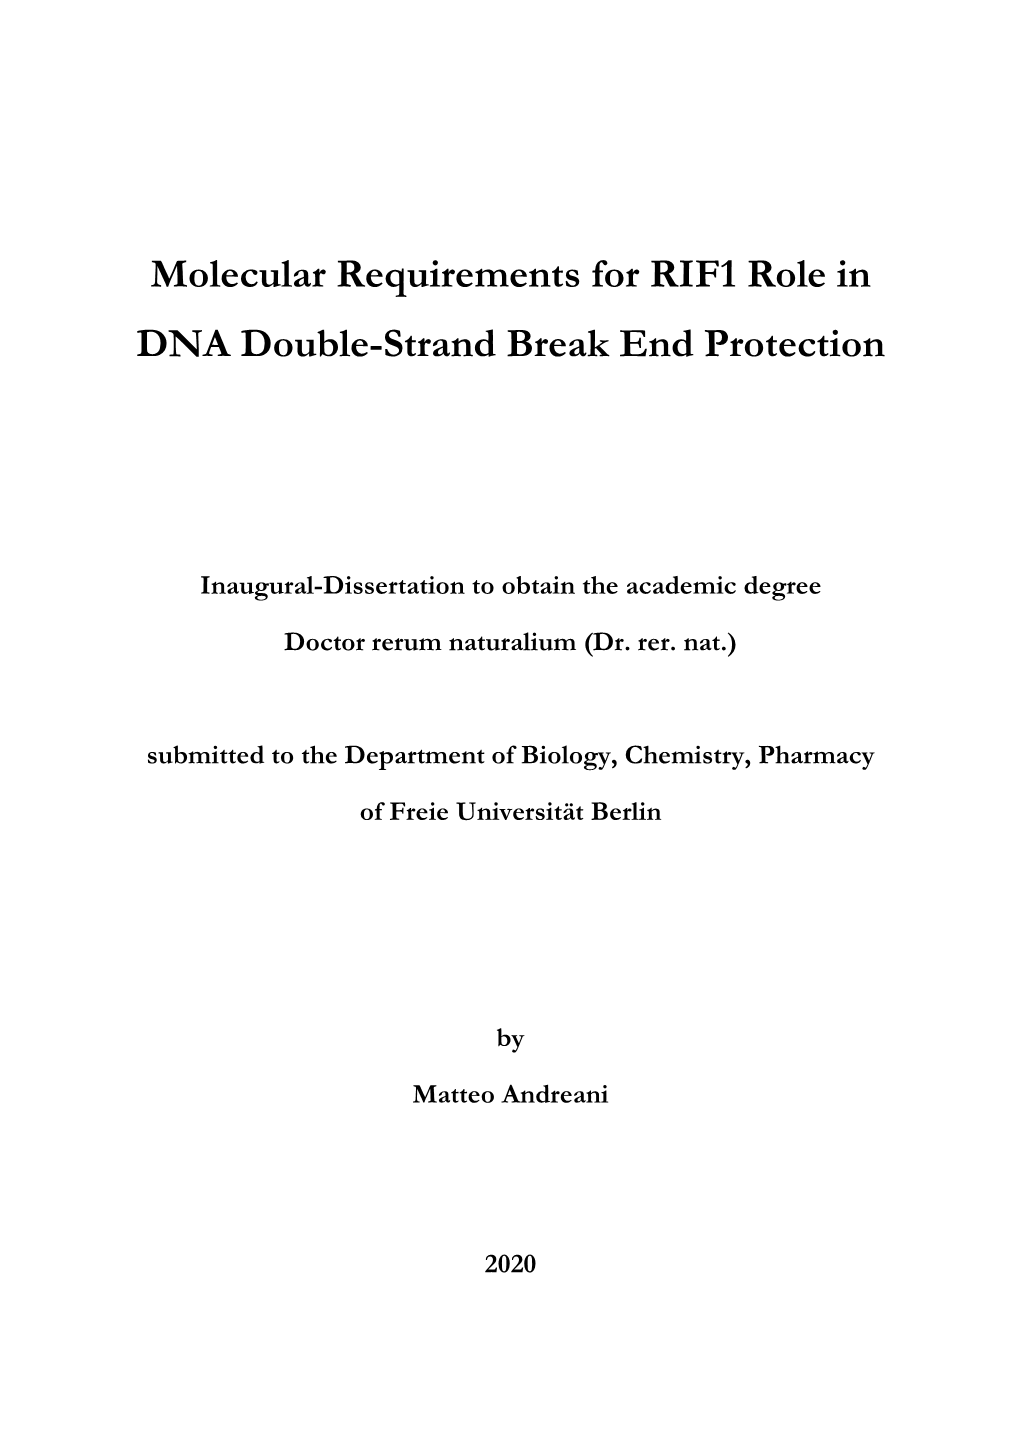 Molecular Requirements for RIF1 Role in DNA Double-Strand Break End Protection